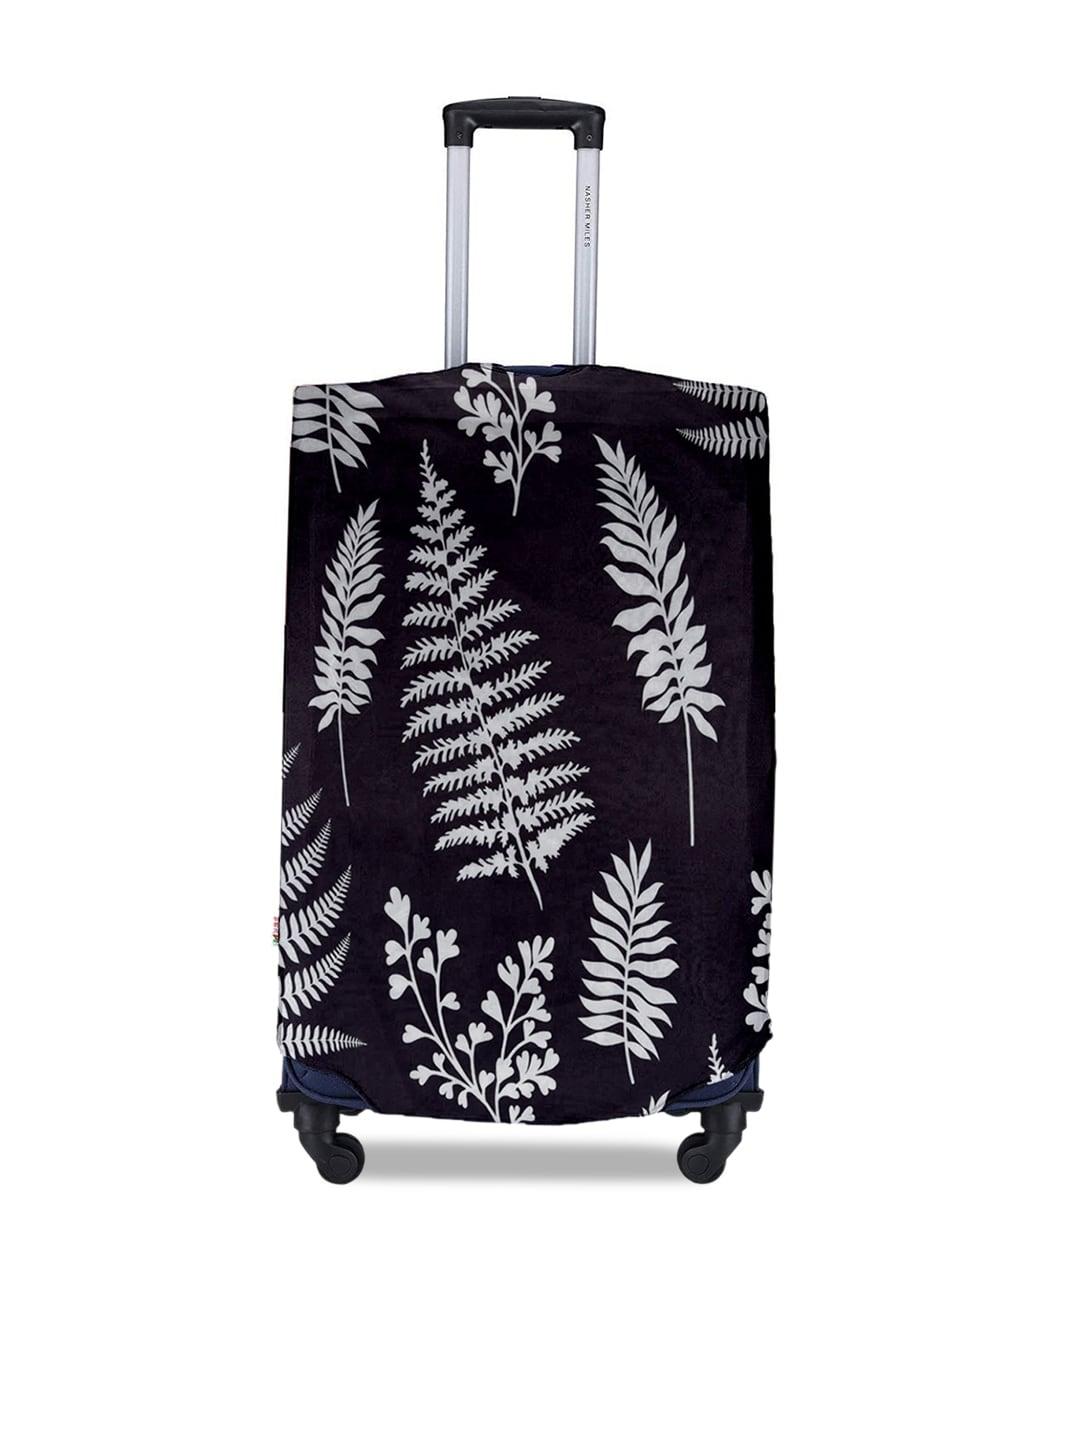 cortina black & white printed protective small trolley bag cover